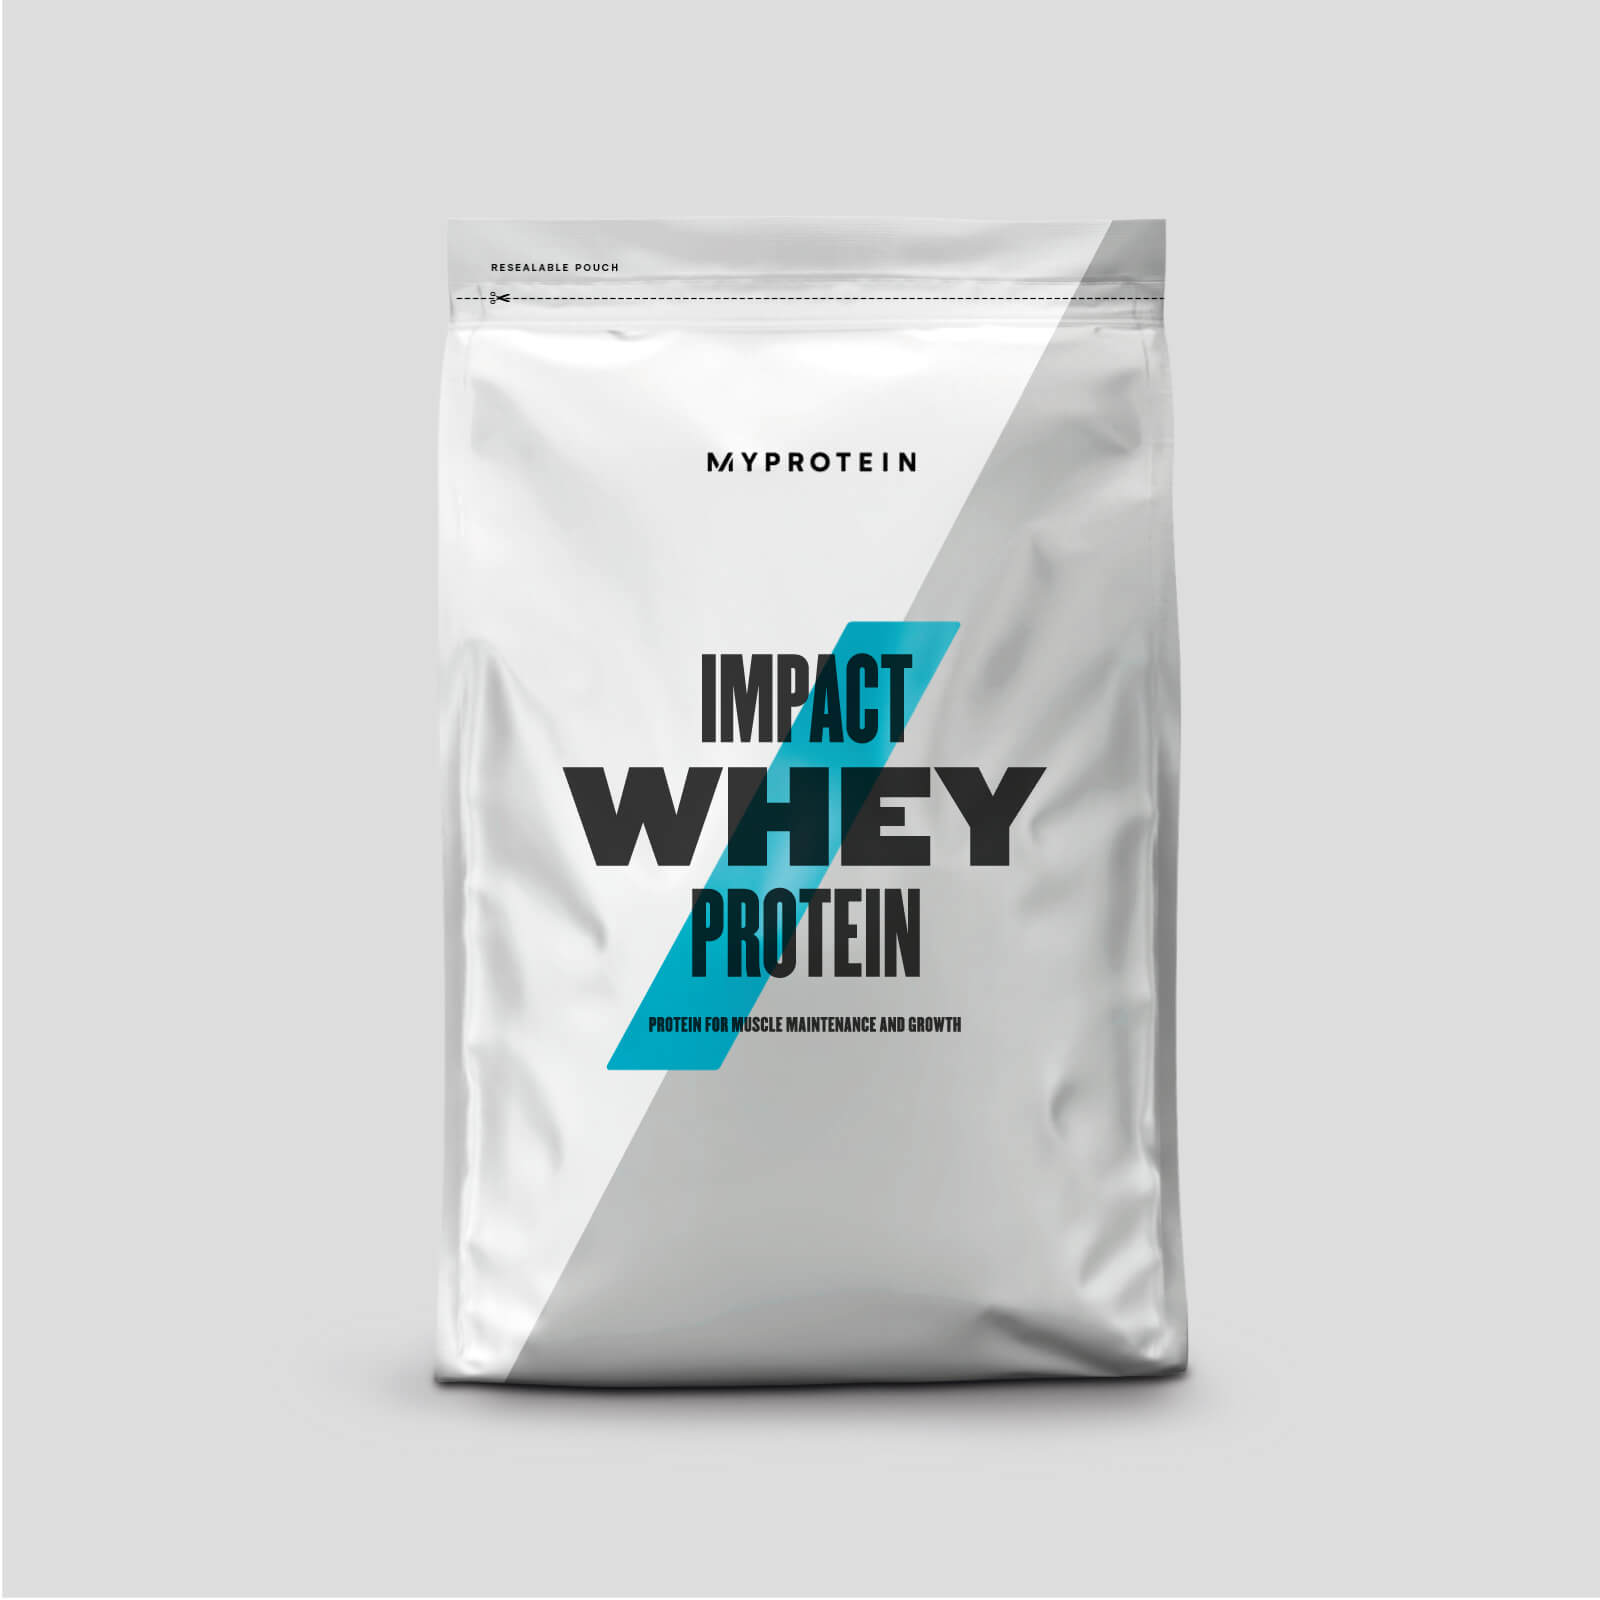 Impact Whey Protein - 250g - Cereal Milk